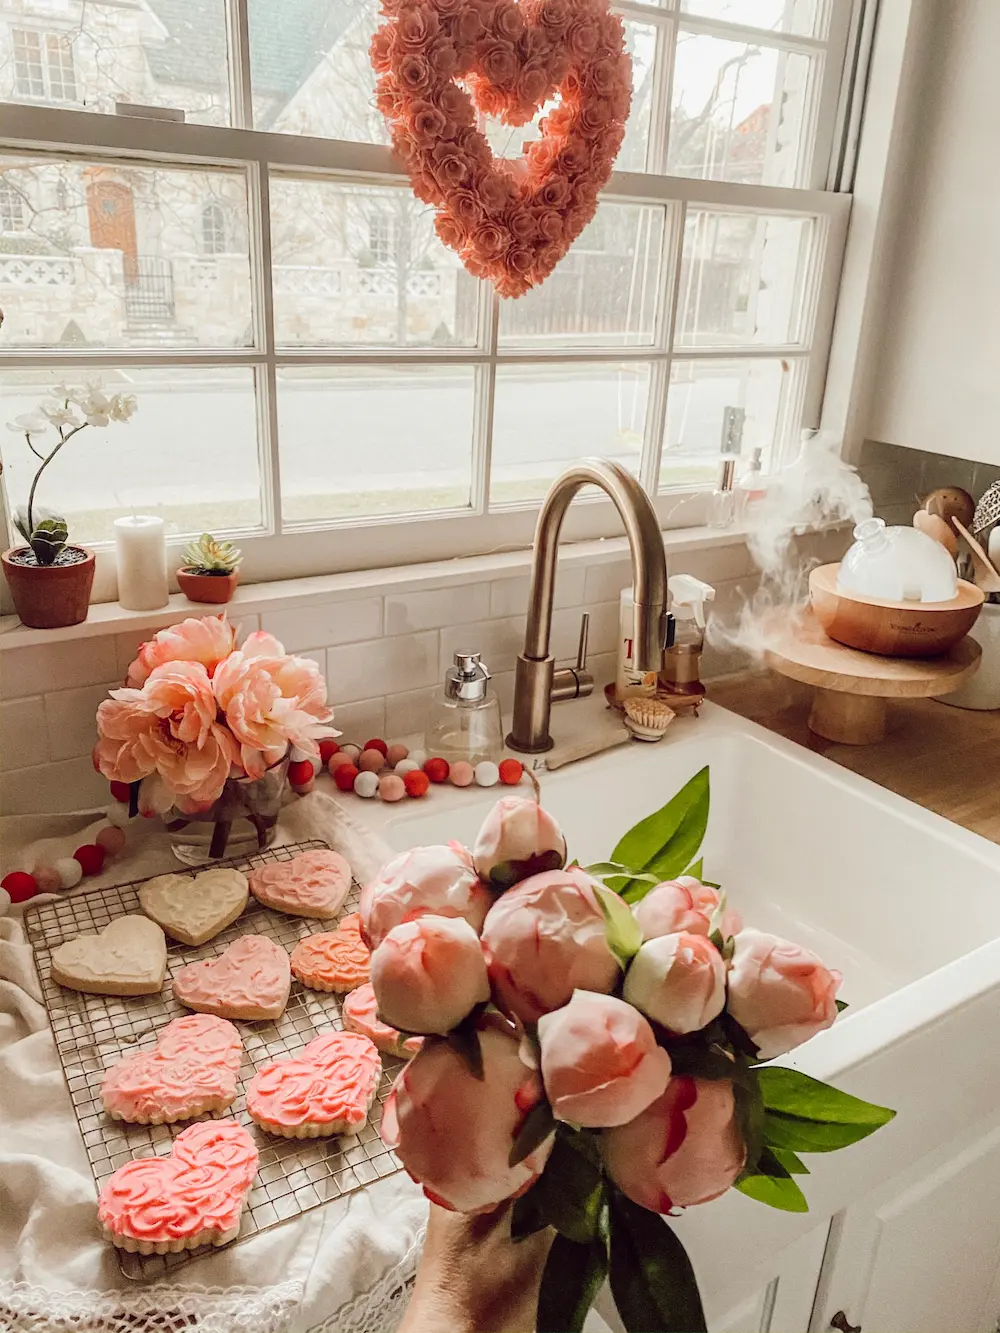 7 Simple Ways to Decorate for Valentine's Day - Clean and Scentsible